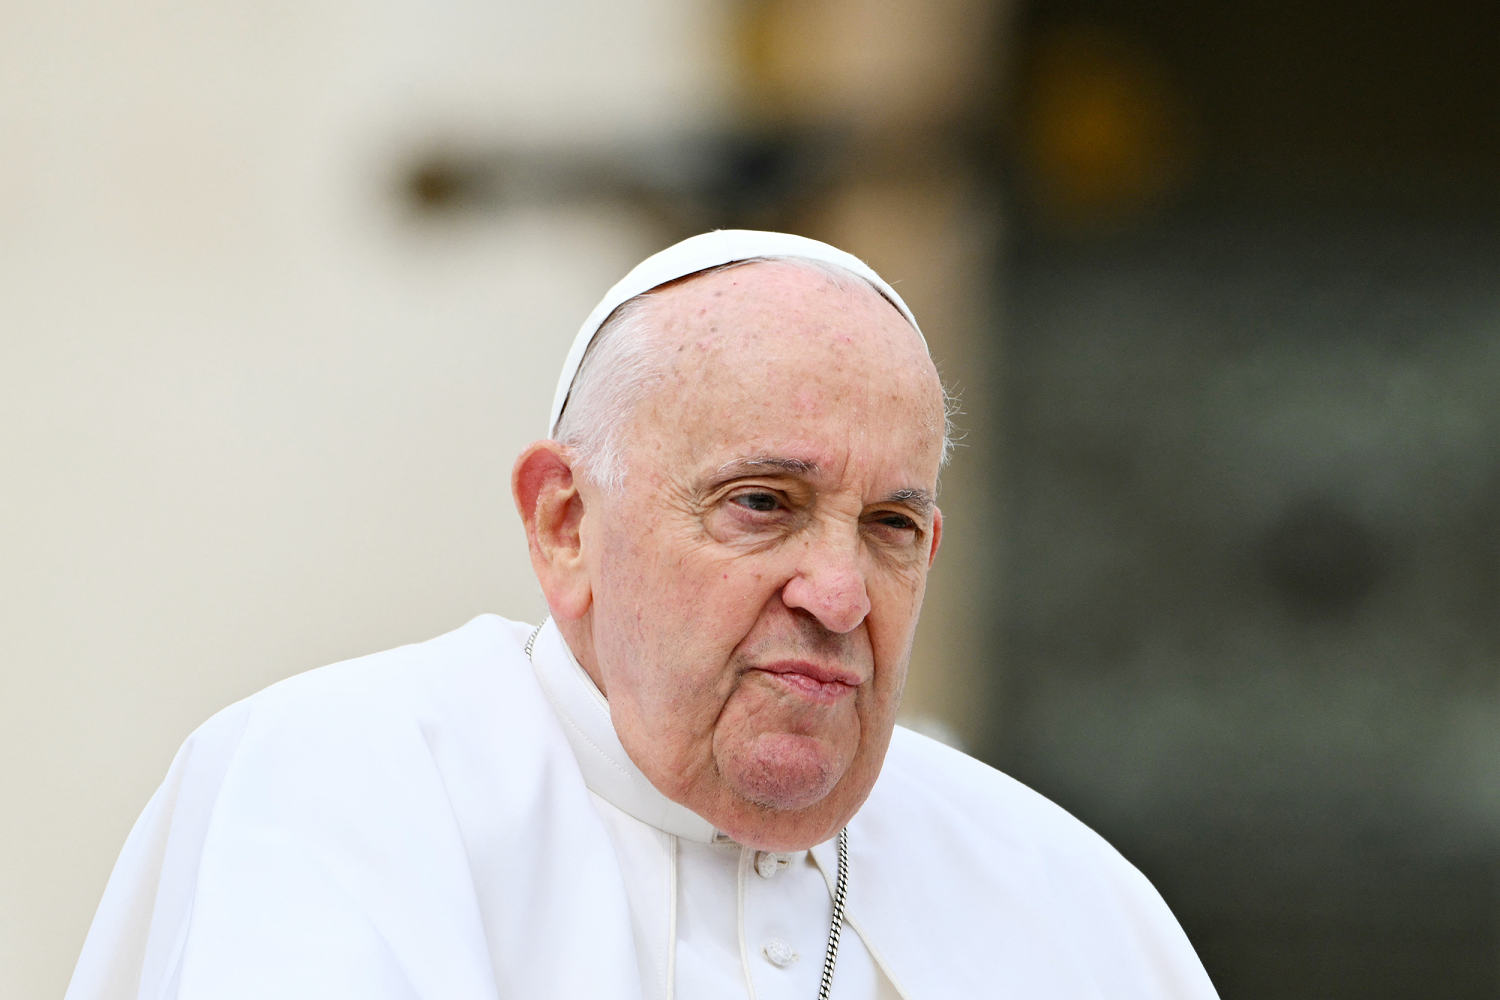 Pope Francis' interview must have disappointed Catholic conservatives — and progressives